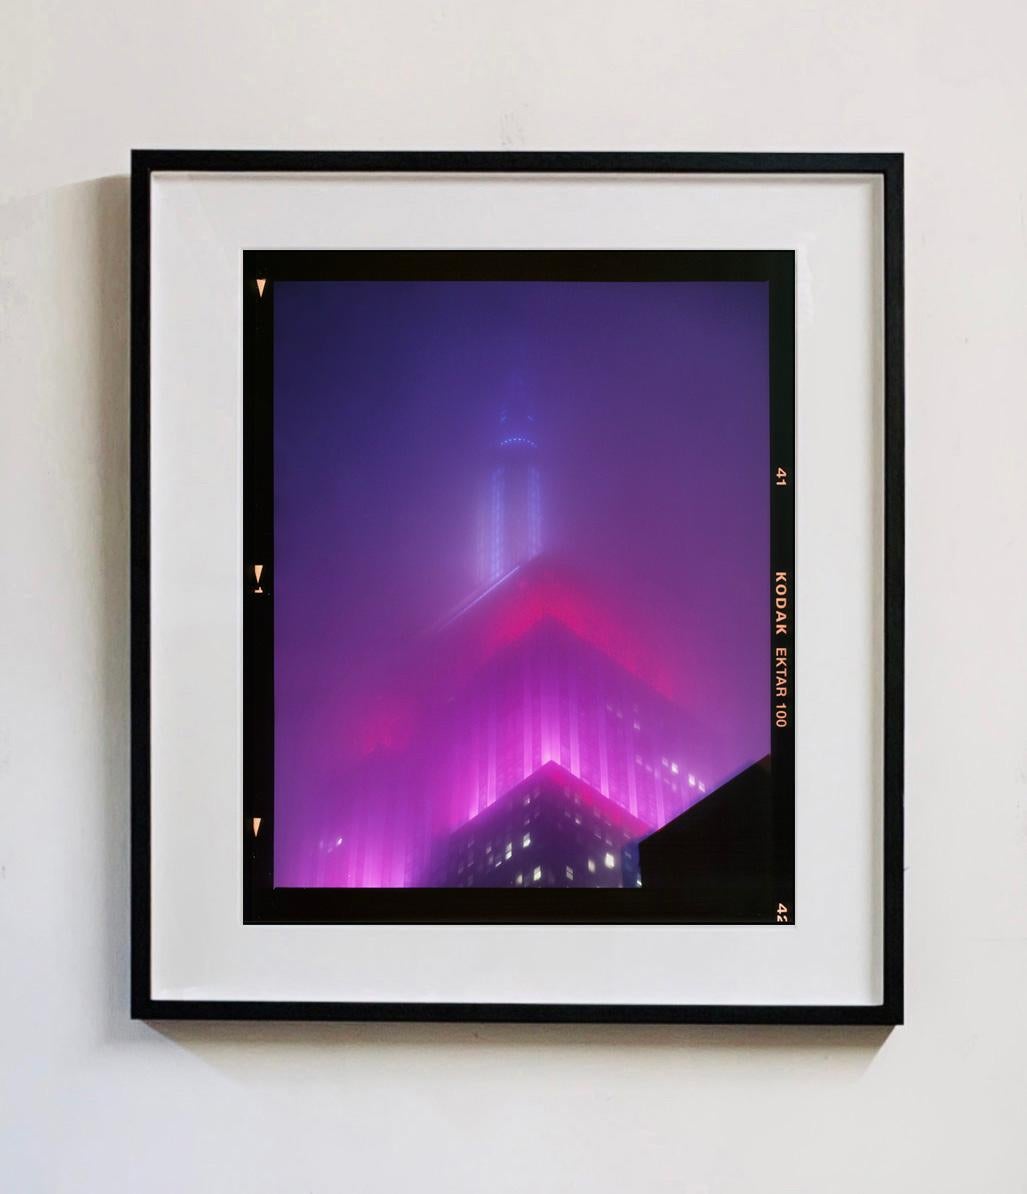 NOMAD V (Film Rebate), New York - Conceptual Architectural Color Photography For Sale 9